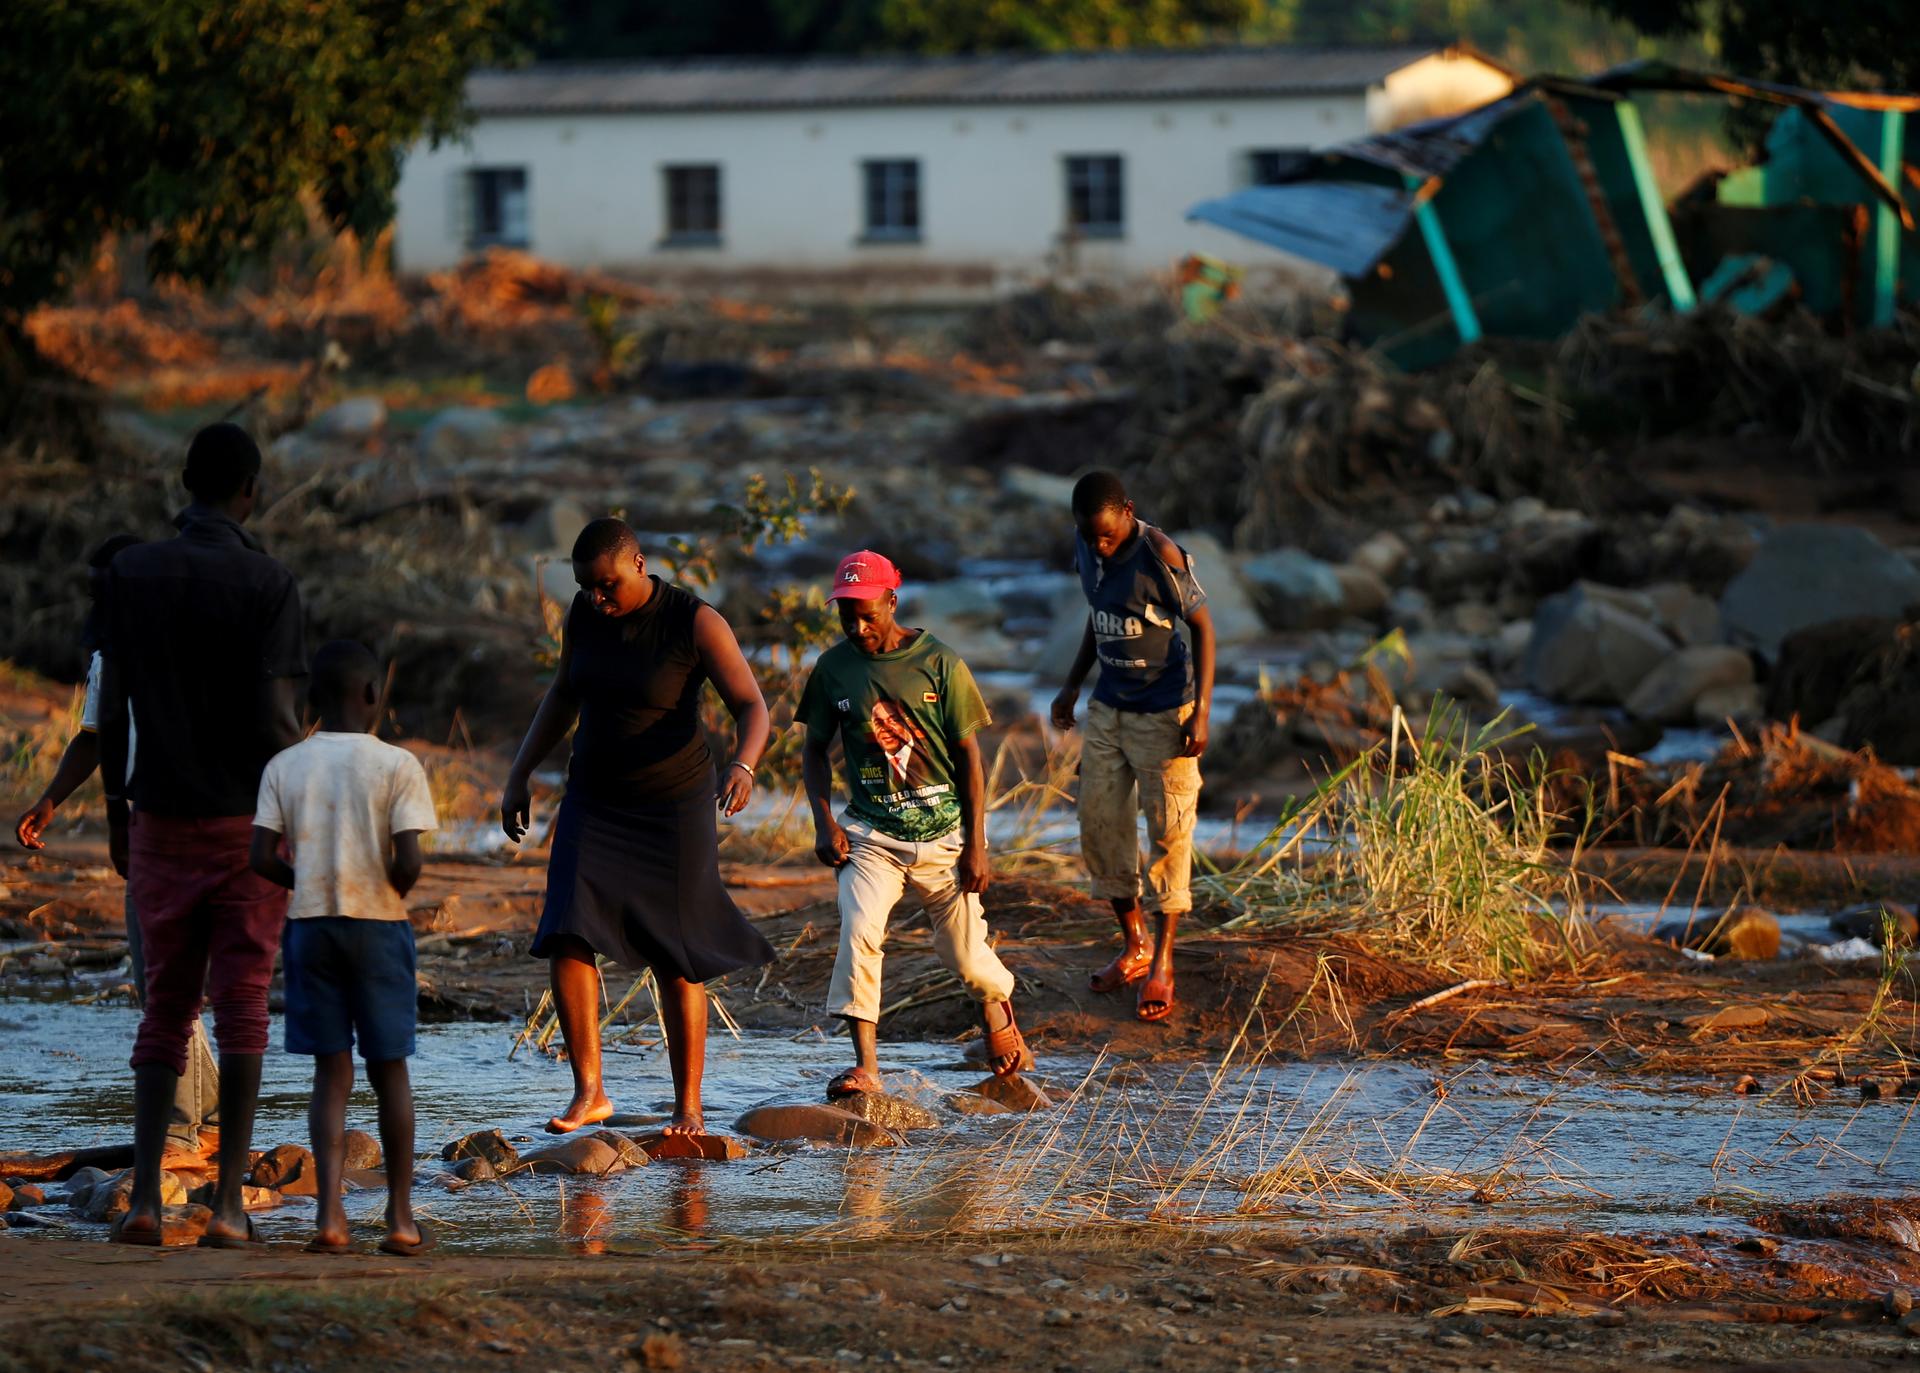 Survivors of Cyclone Idai walk through flooded waters to business center to receive aid.